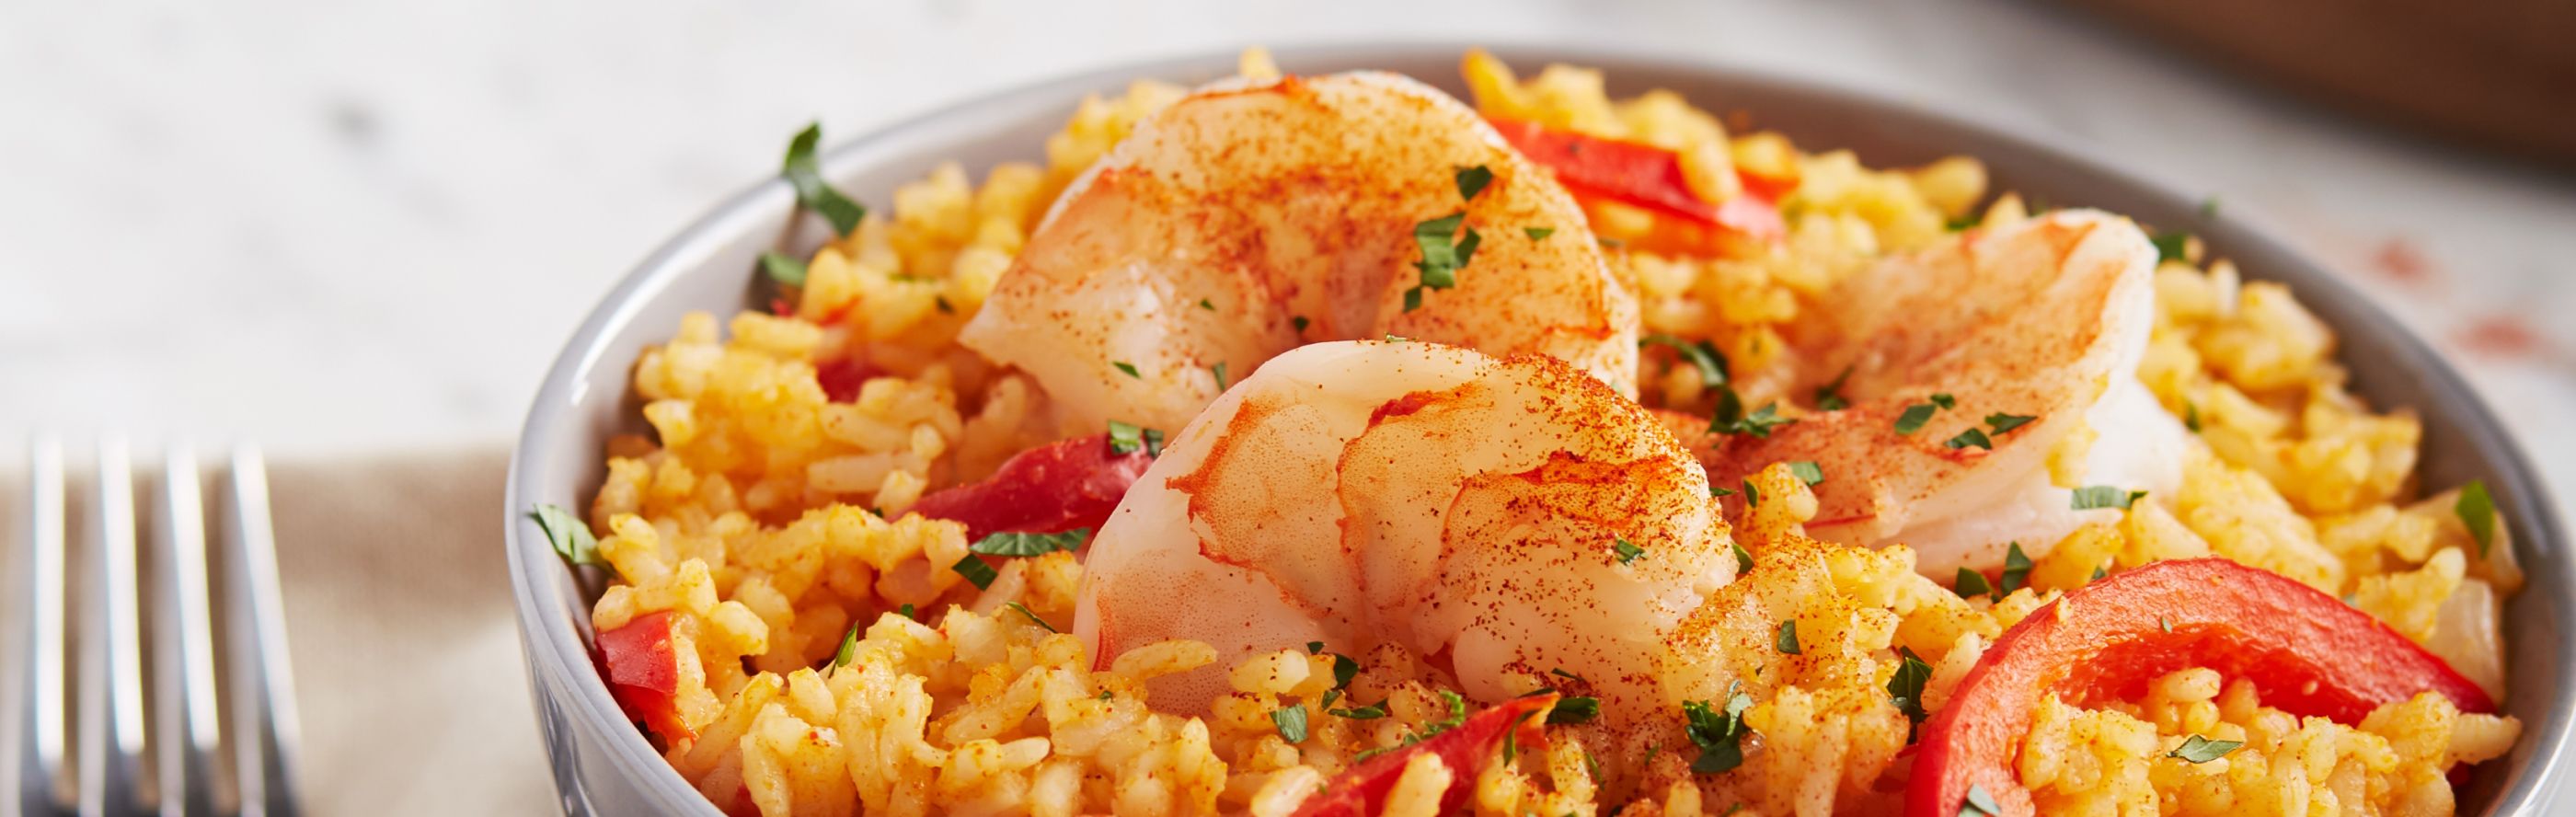 Spanish rice topped with shrimp